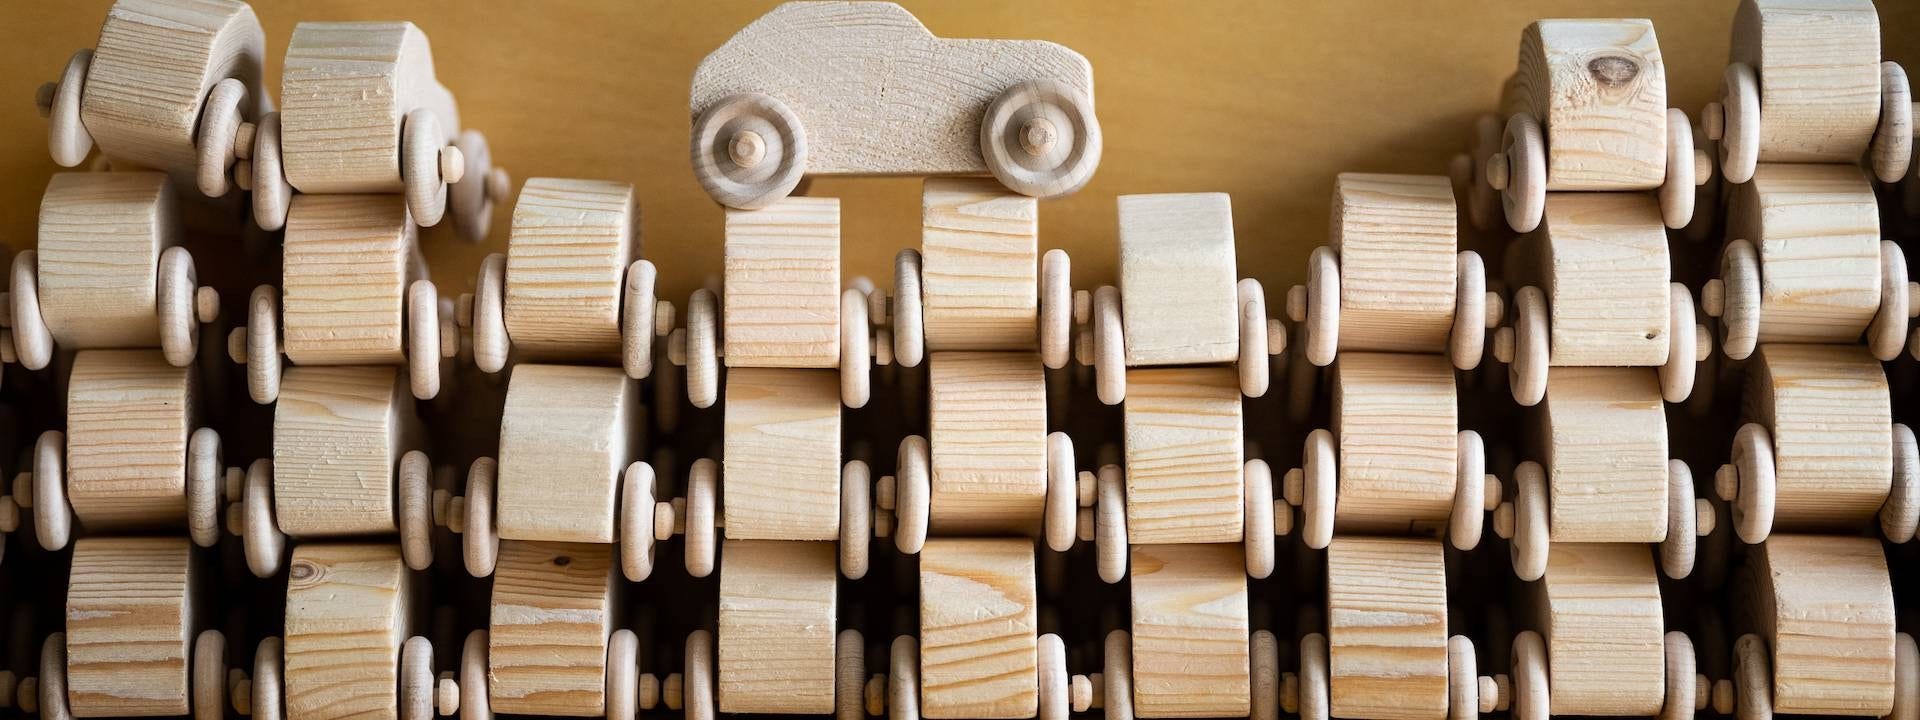 Building Wooden Toy Cars to Help Build God’s Kingdom